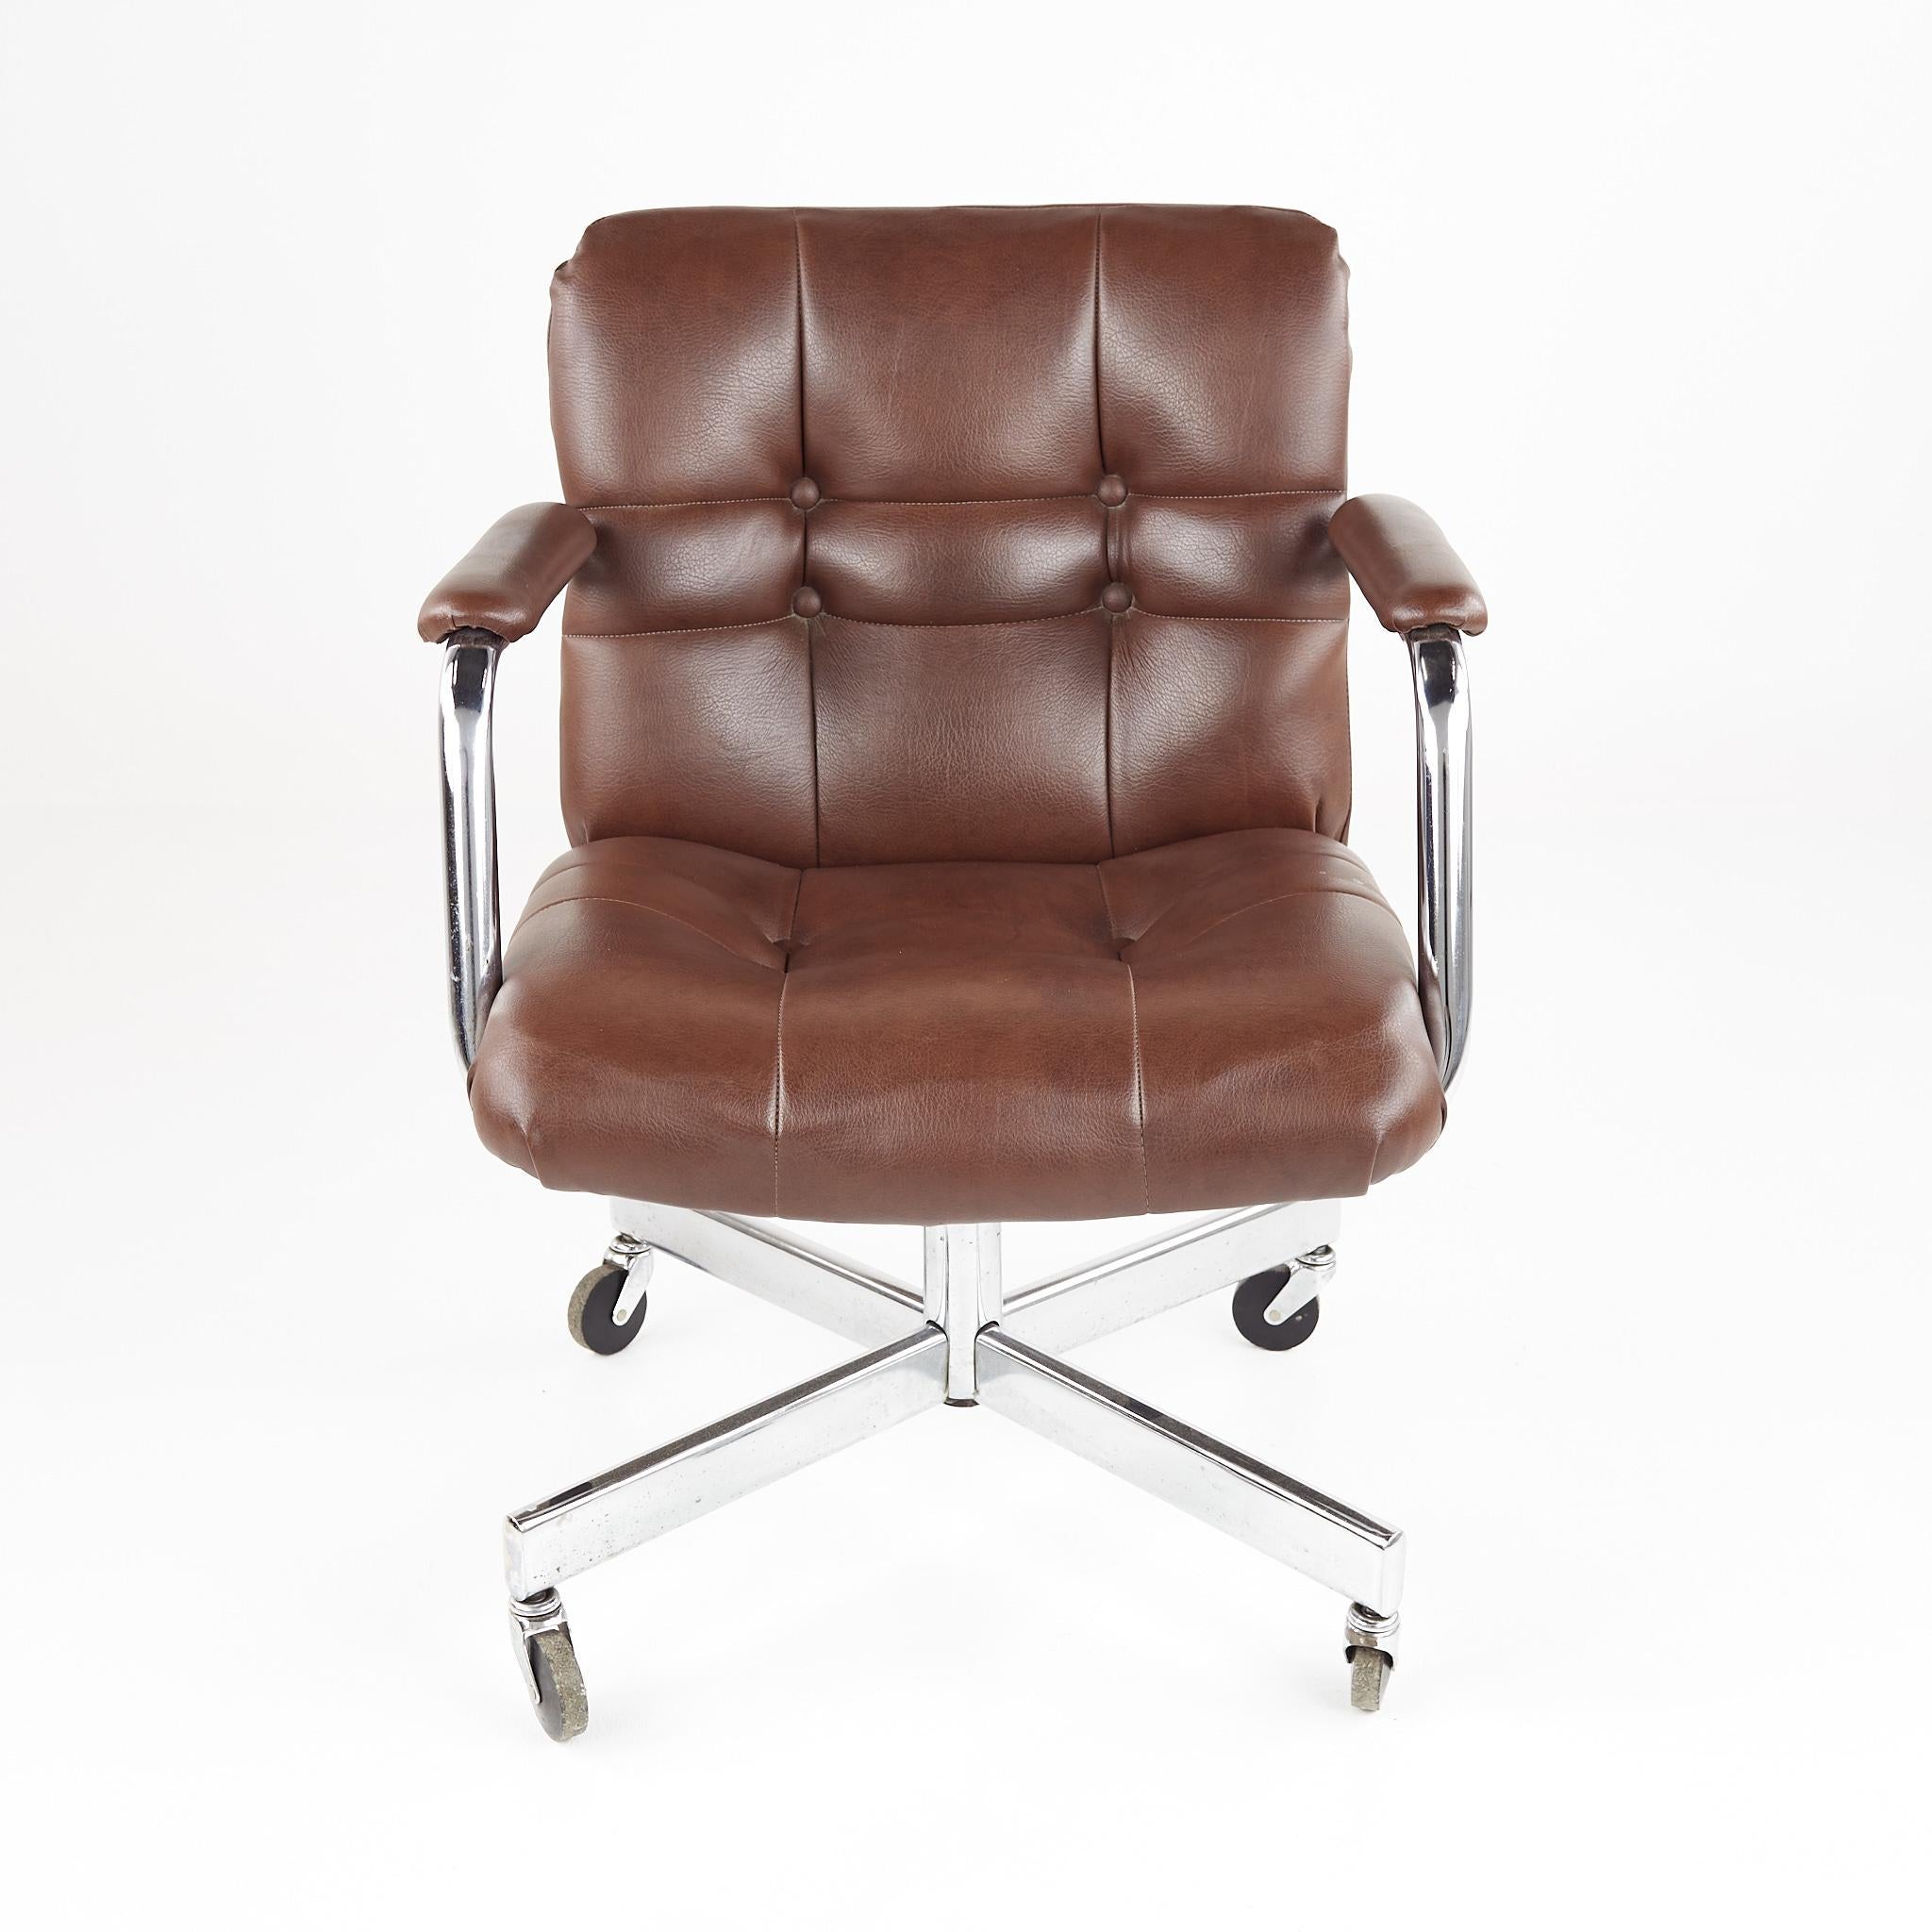 Mid century brown and chrome swivel wheeled office chair

This chair measures: 23.5 wide x 22 deep x 31.5 inches high, with a seat height of 18 and arm height of 25.5 inches

All pieces of furniture can be had in what we call restored vintage